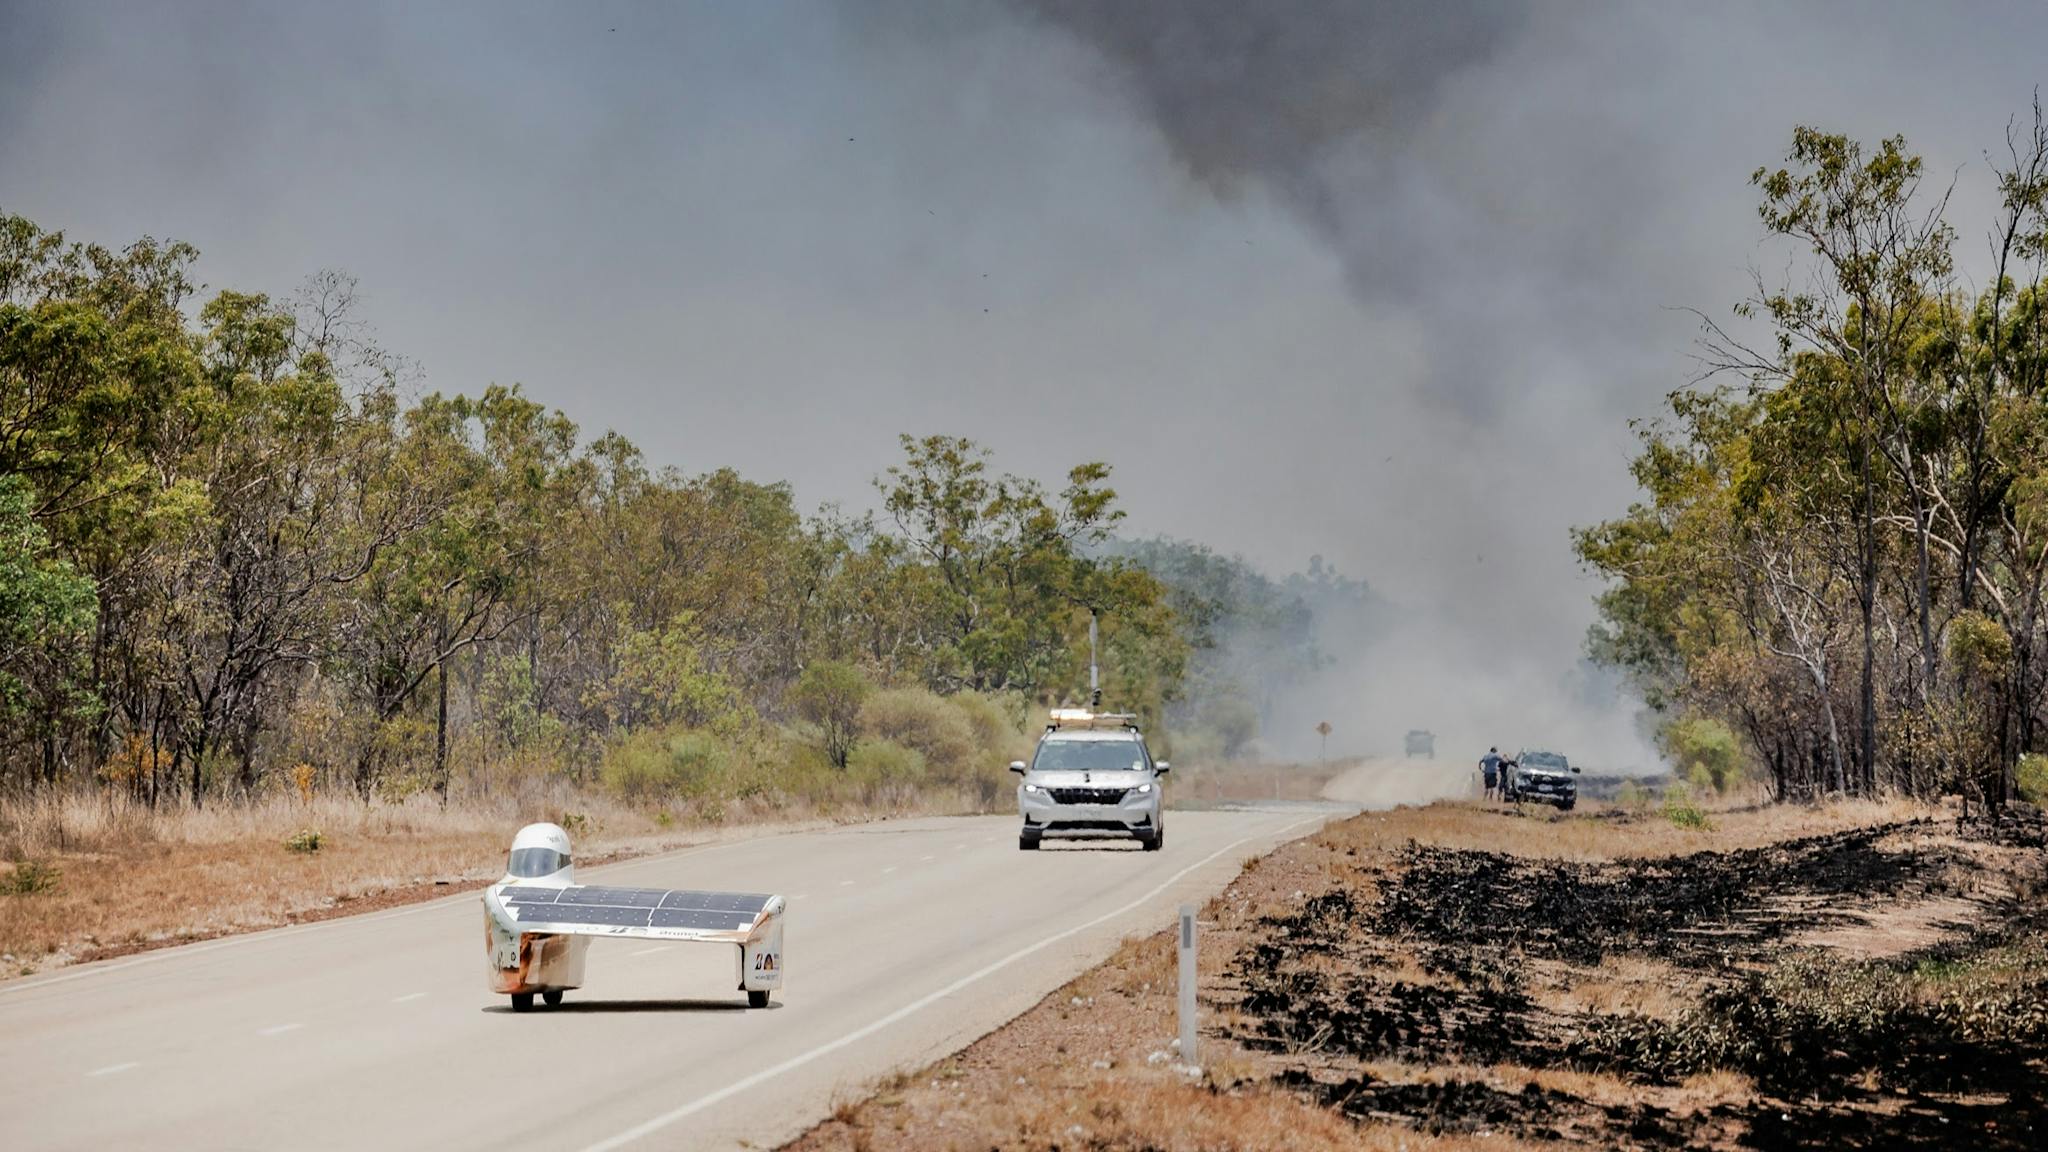 Brunel Solar Team hindered by forest fires on first day of world solar racing championships